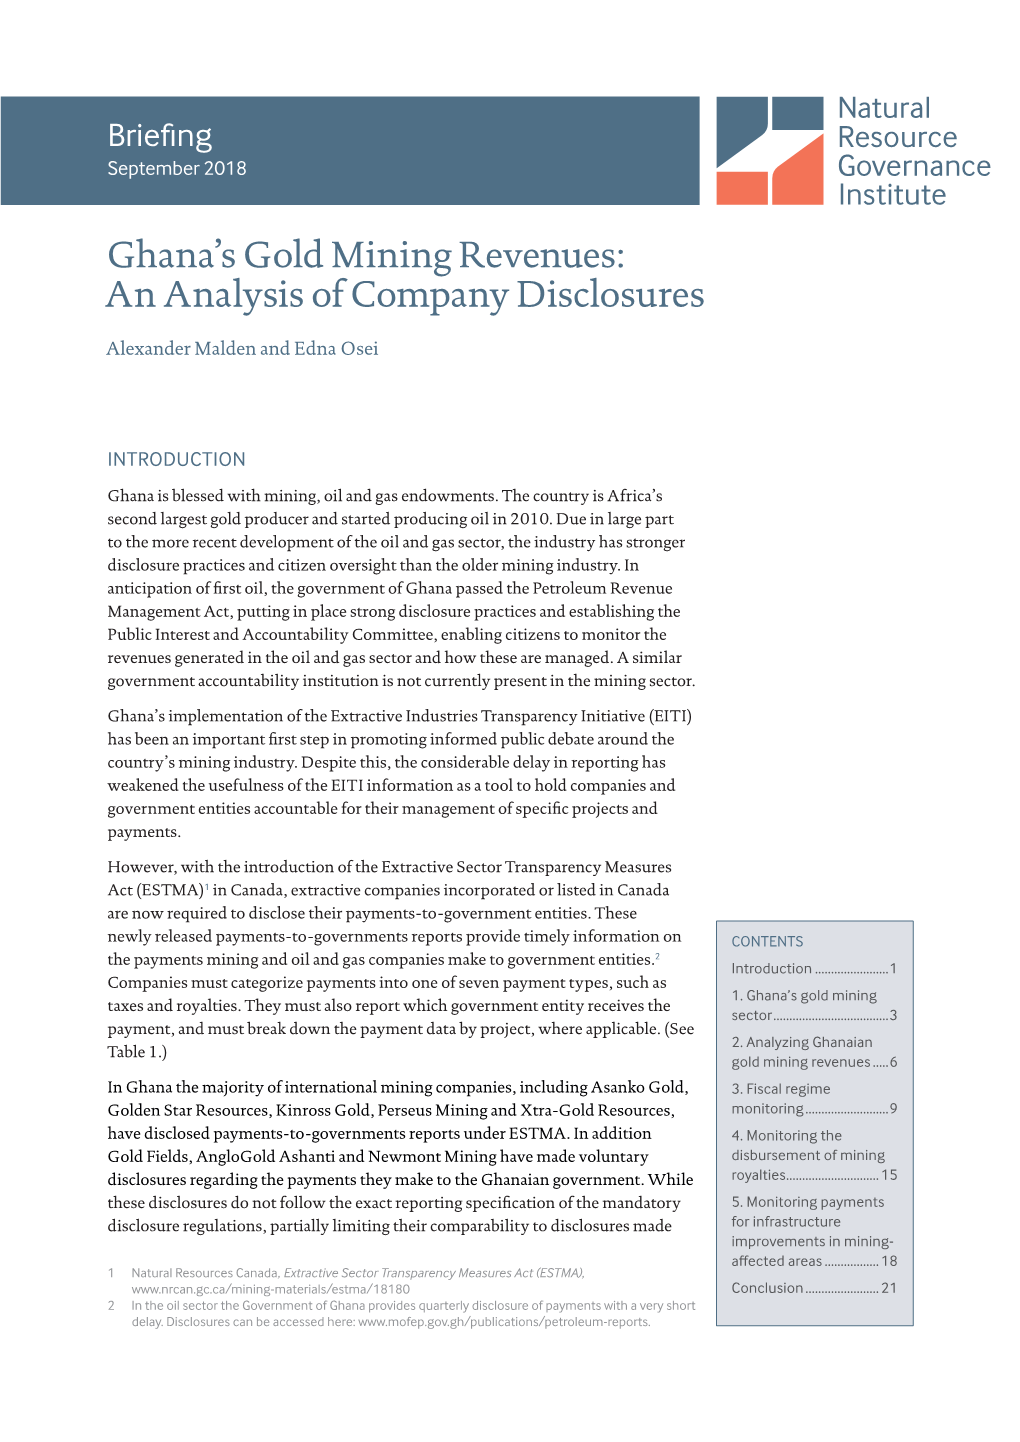 Ghana's Gold Mining Revenues: an Analysis of Company Disclosures